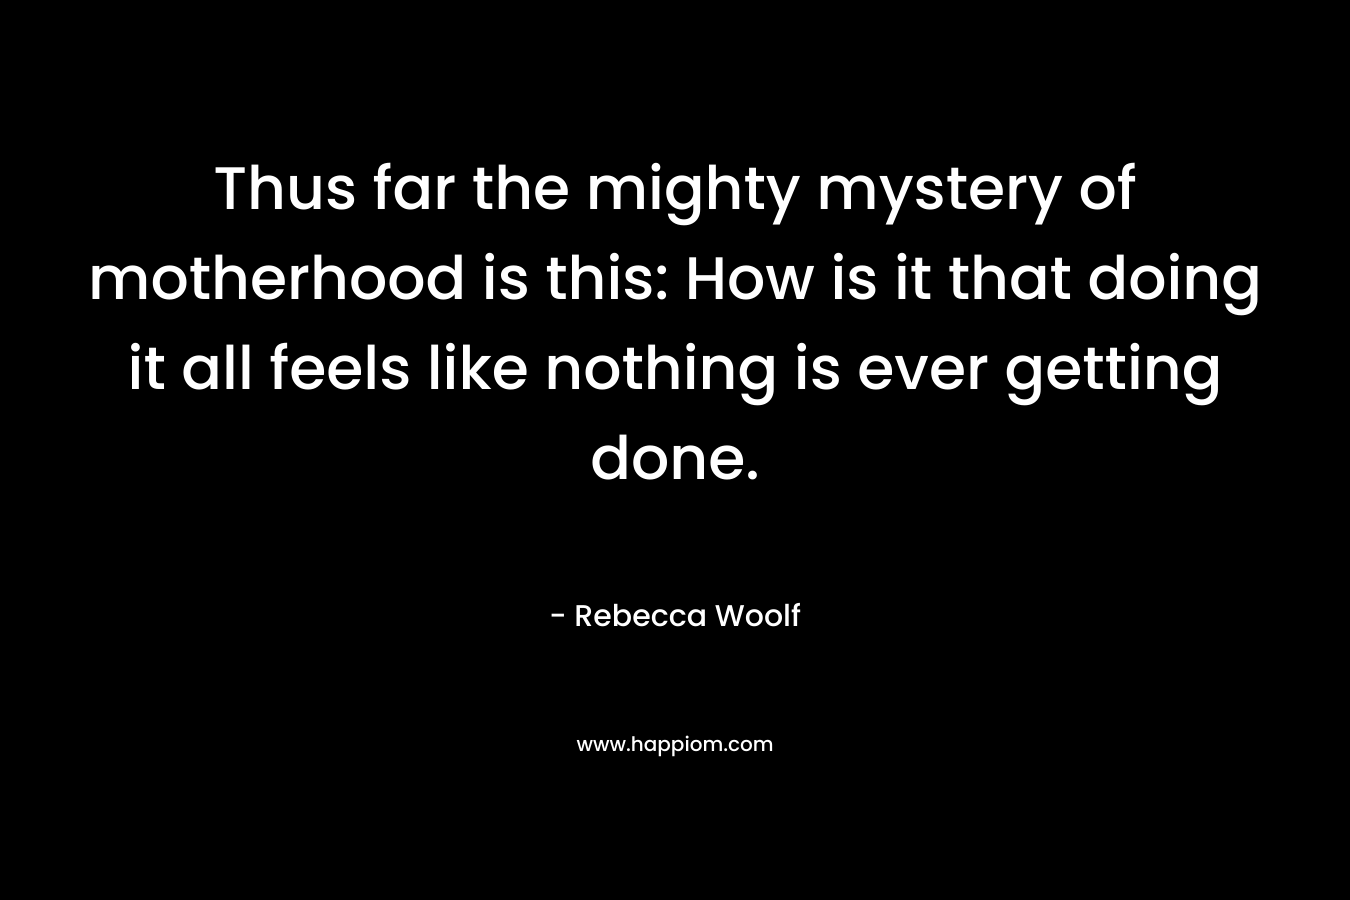 Thus far the mighty mystery of motherhood is this: How is it that doing it all feels like nothing is ever getting done. – Rebecca Woolf